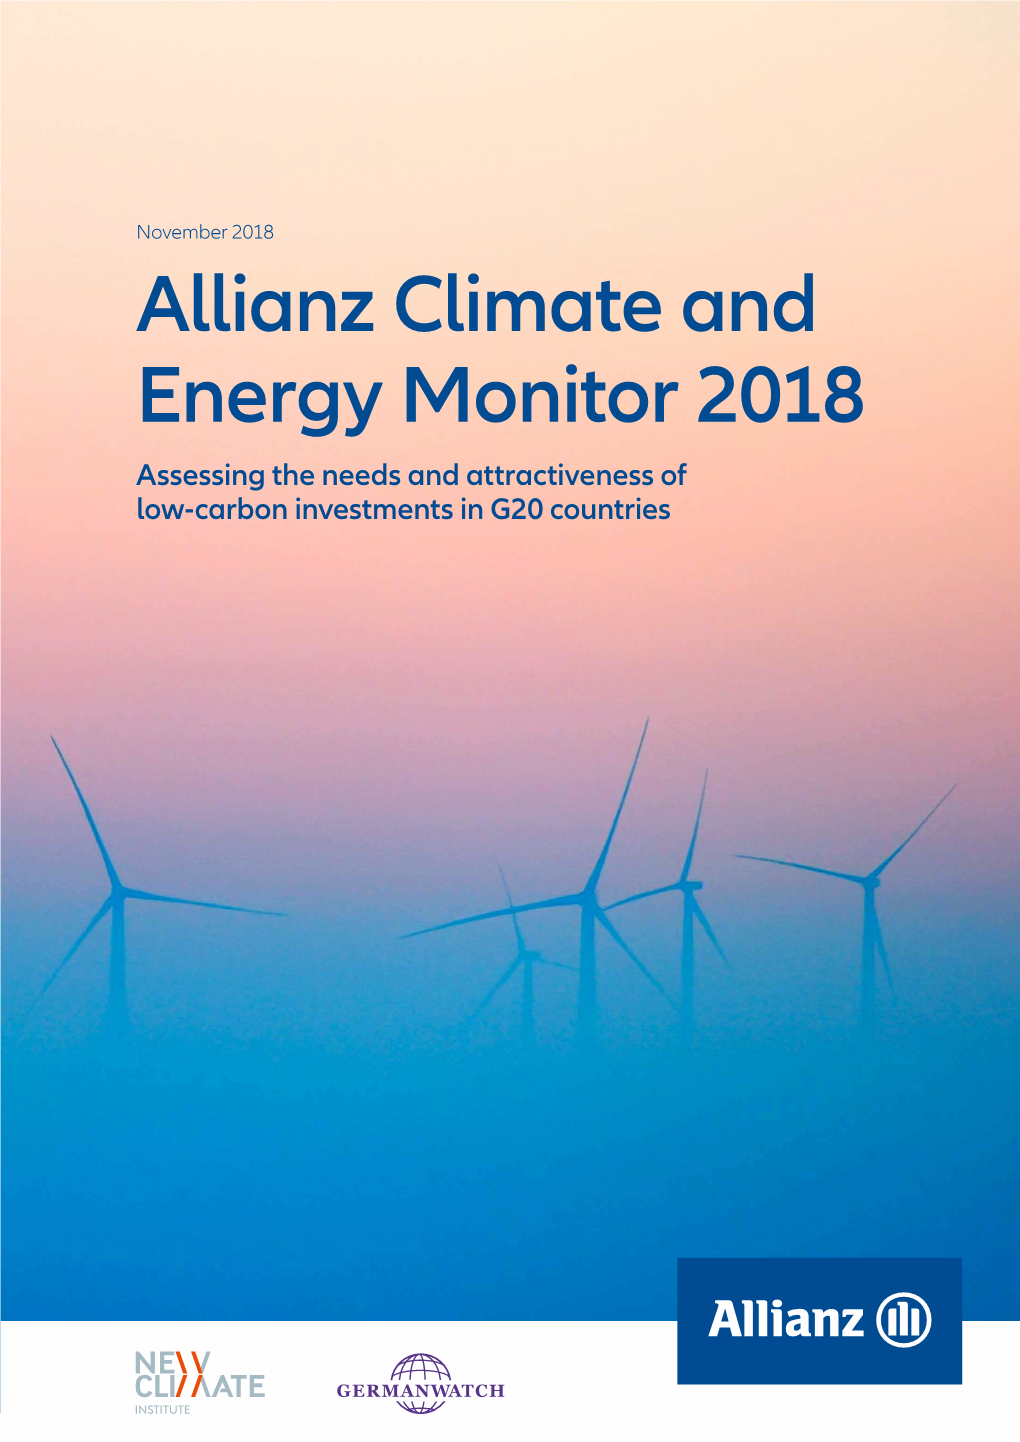 Allianz Climate and Energy Monitor 2018